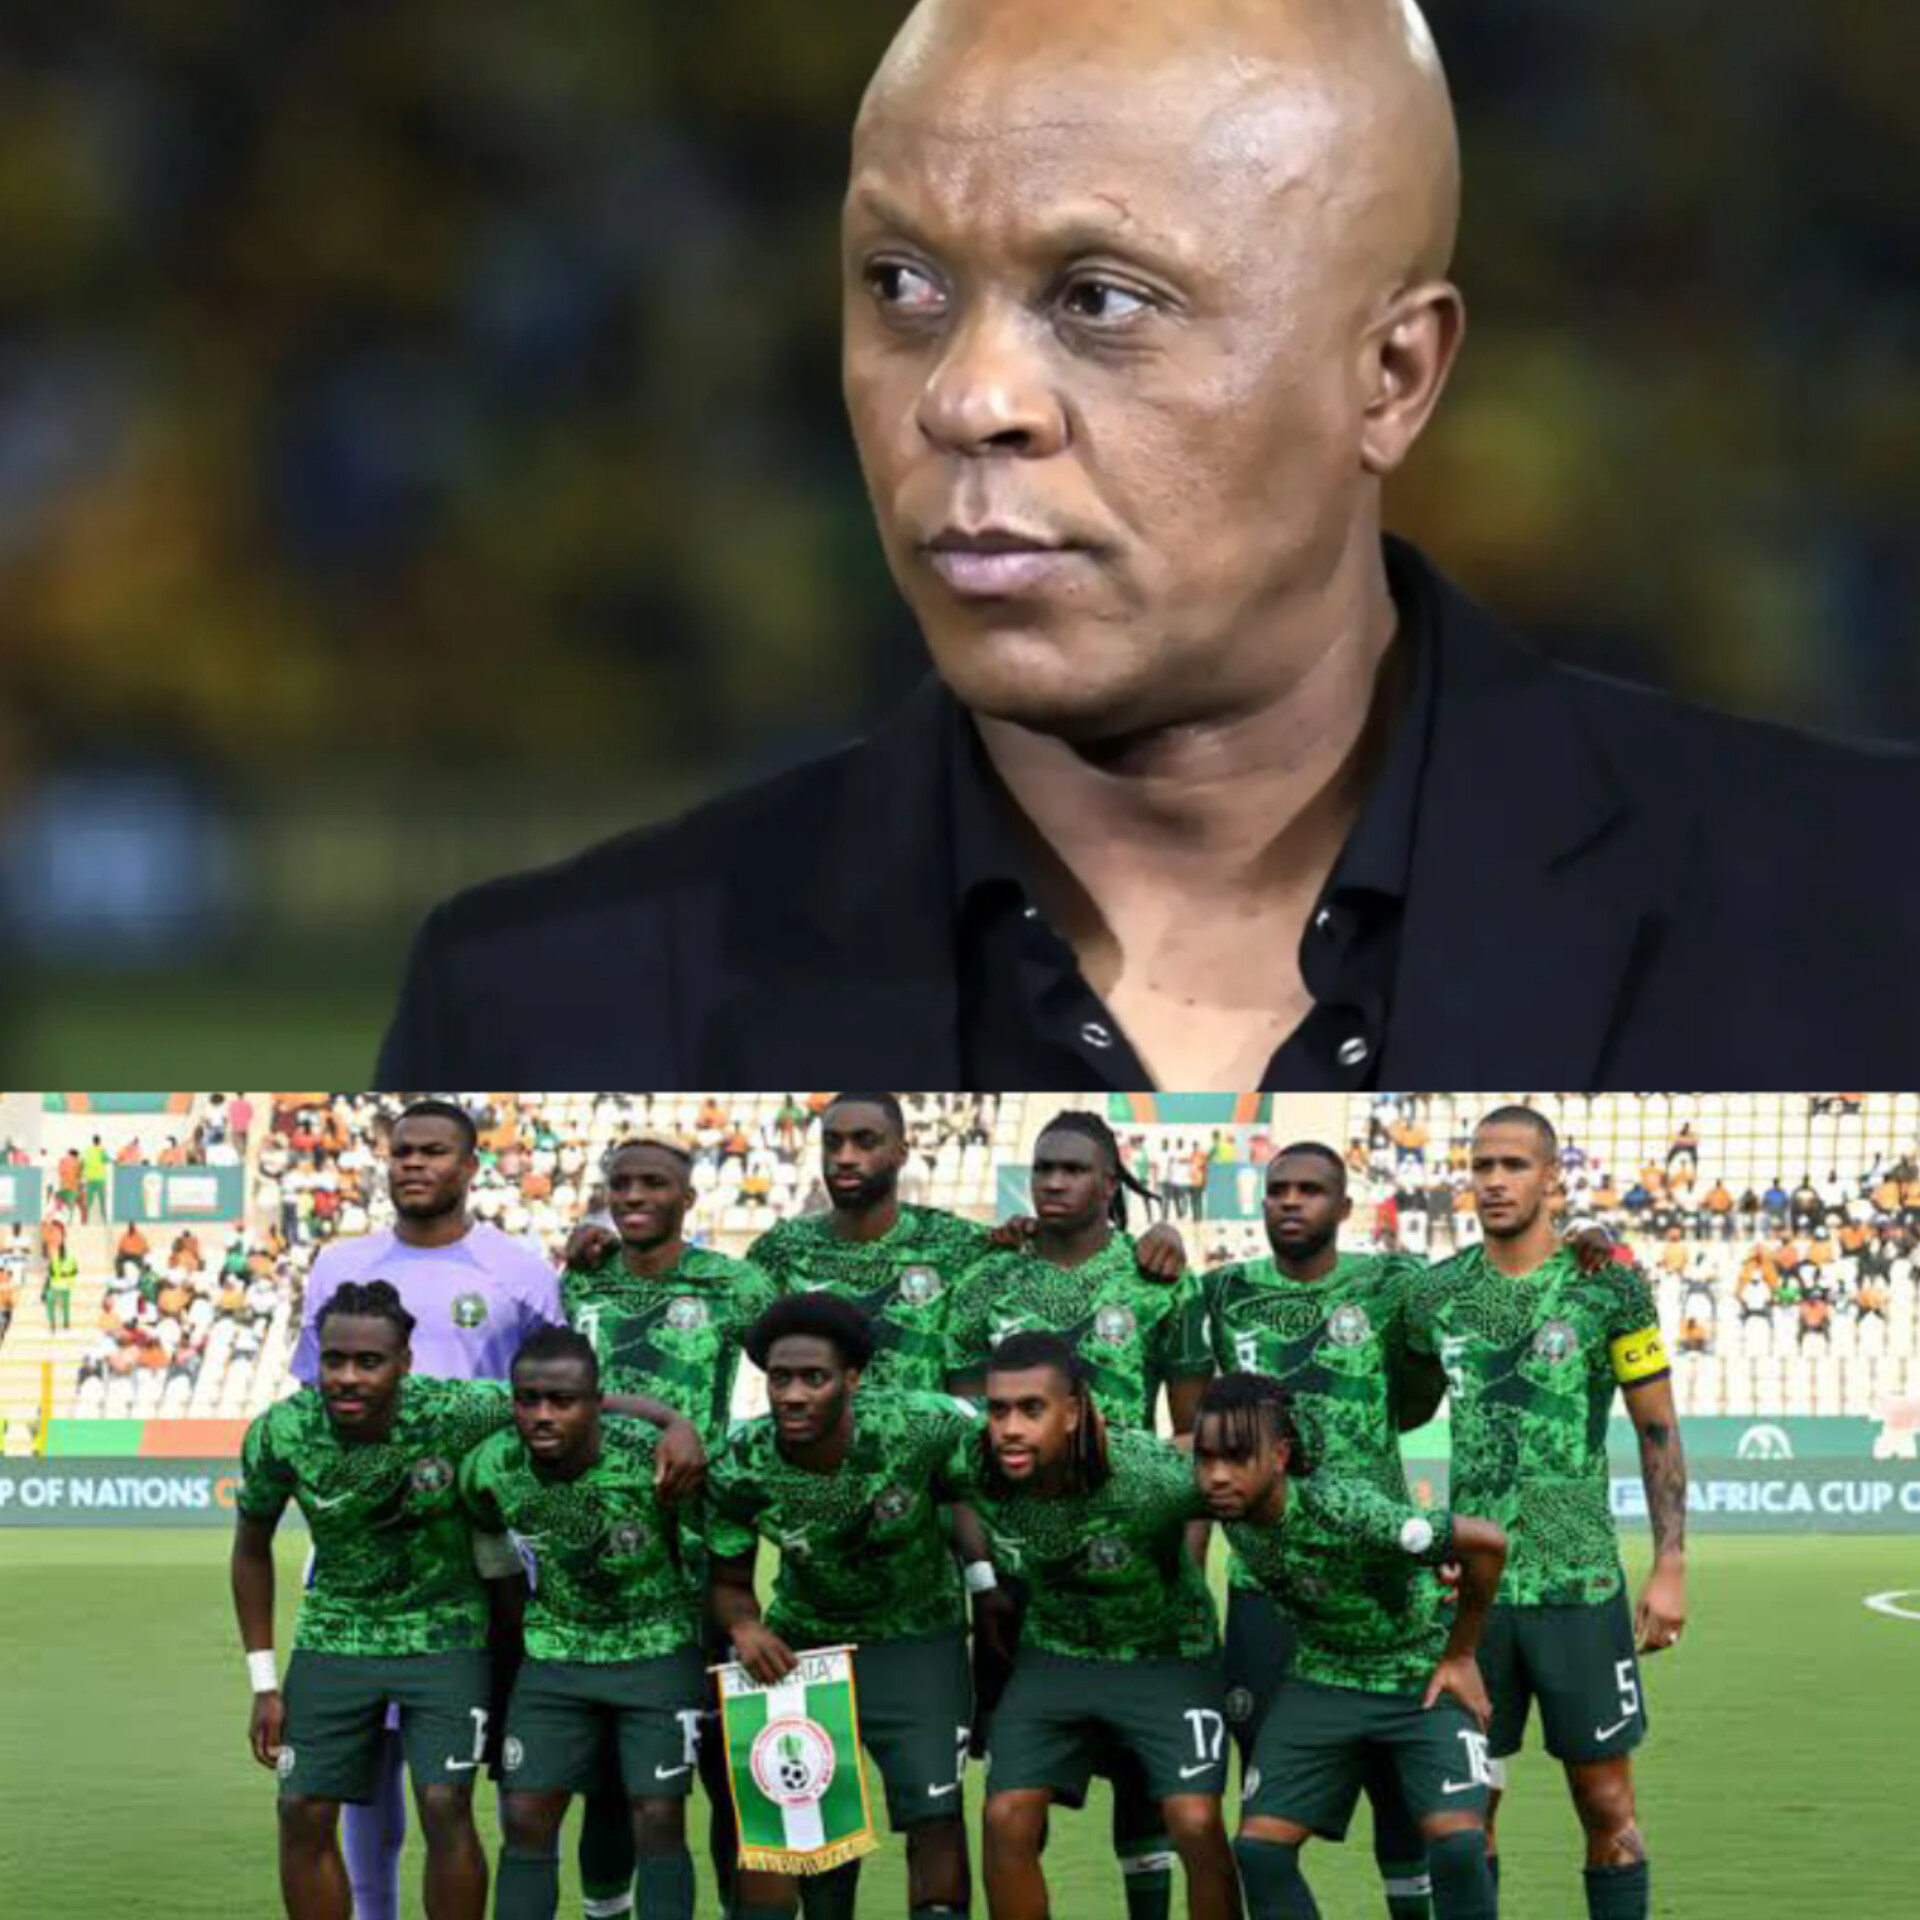 2026 FIFA W/C Qualifiers: I can bet all my money South Africa will overcome Super Eagles - Former SA footballer, Khumalo